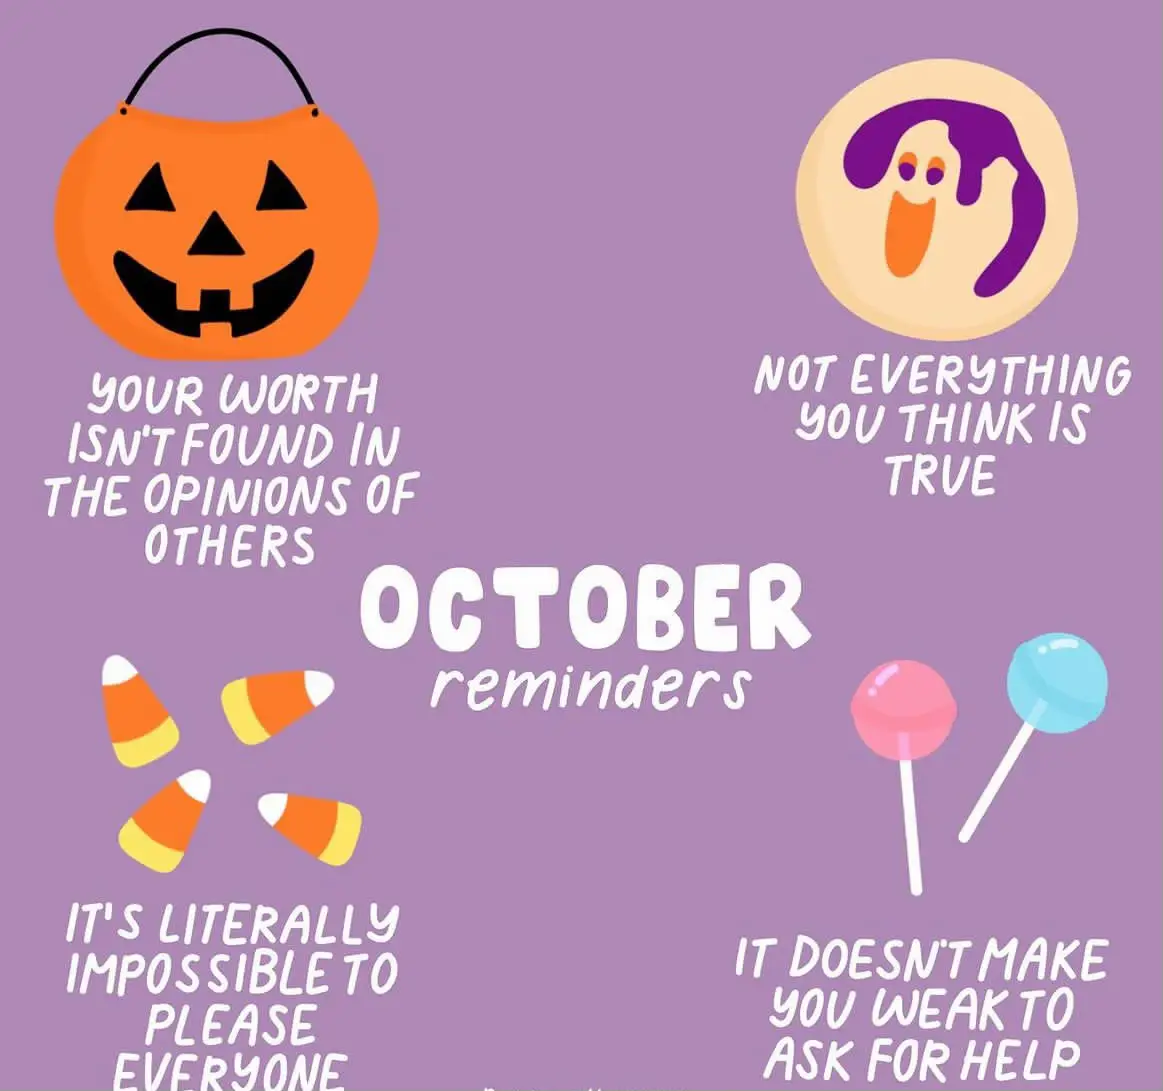  A list of reminders for October with the words "It doesn't make you weak to ask for help" and "It doesn't make you weak to ask for help" at the top.